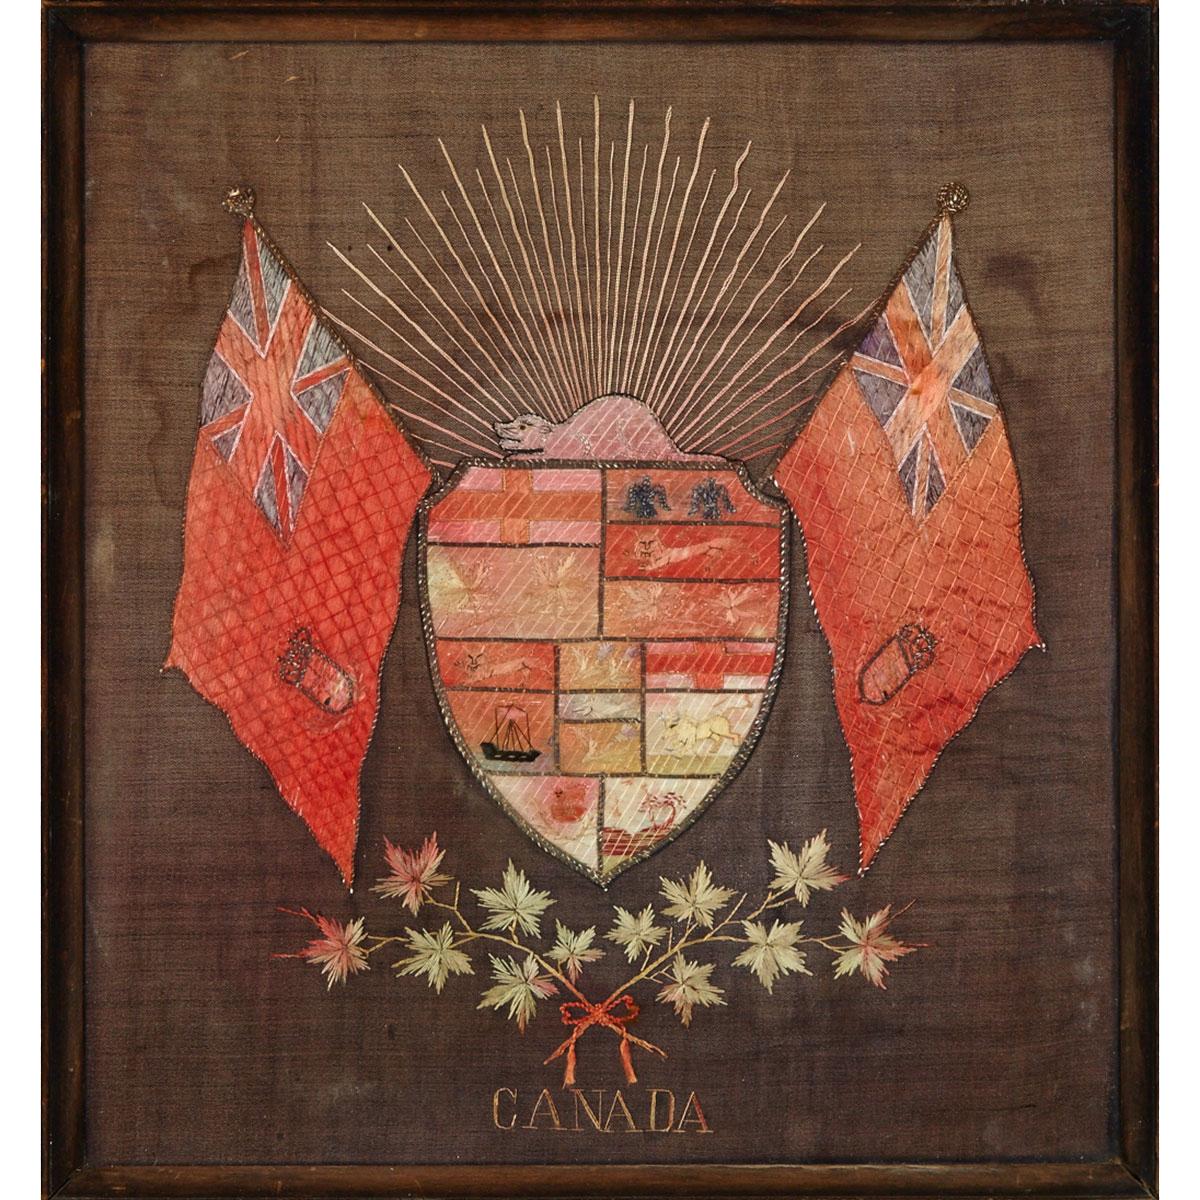 Needlework Picture of Canadian Coat of Arms, c.1905